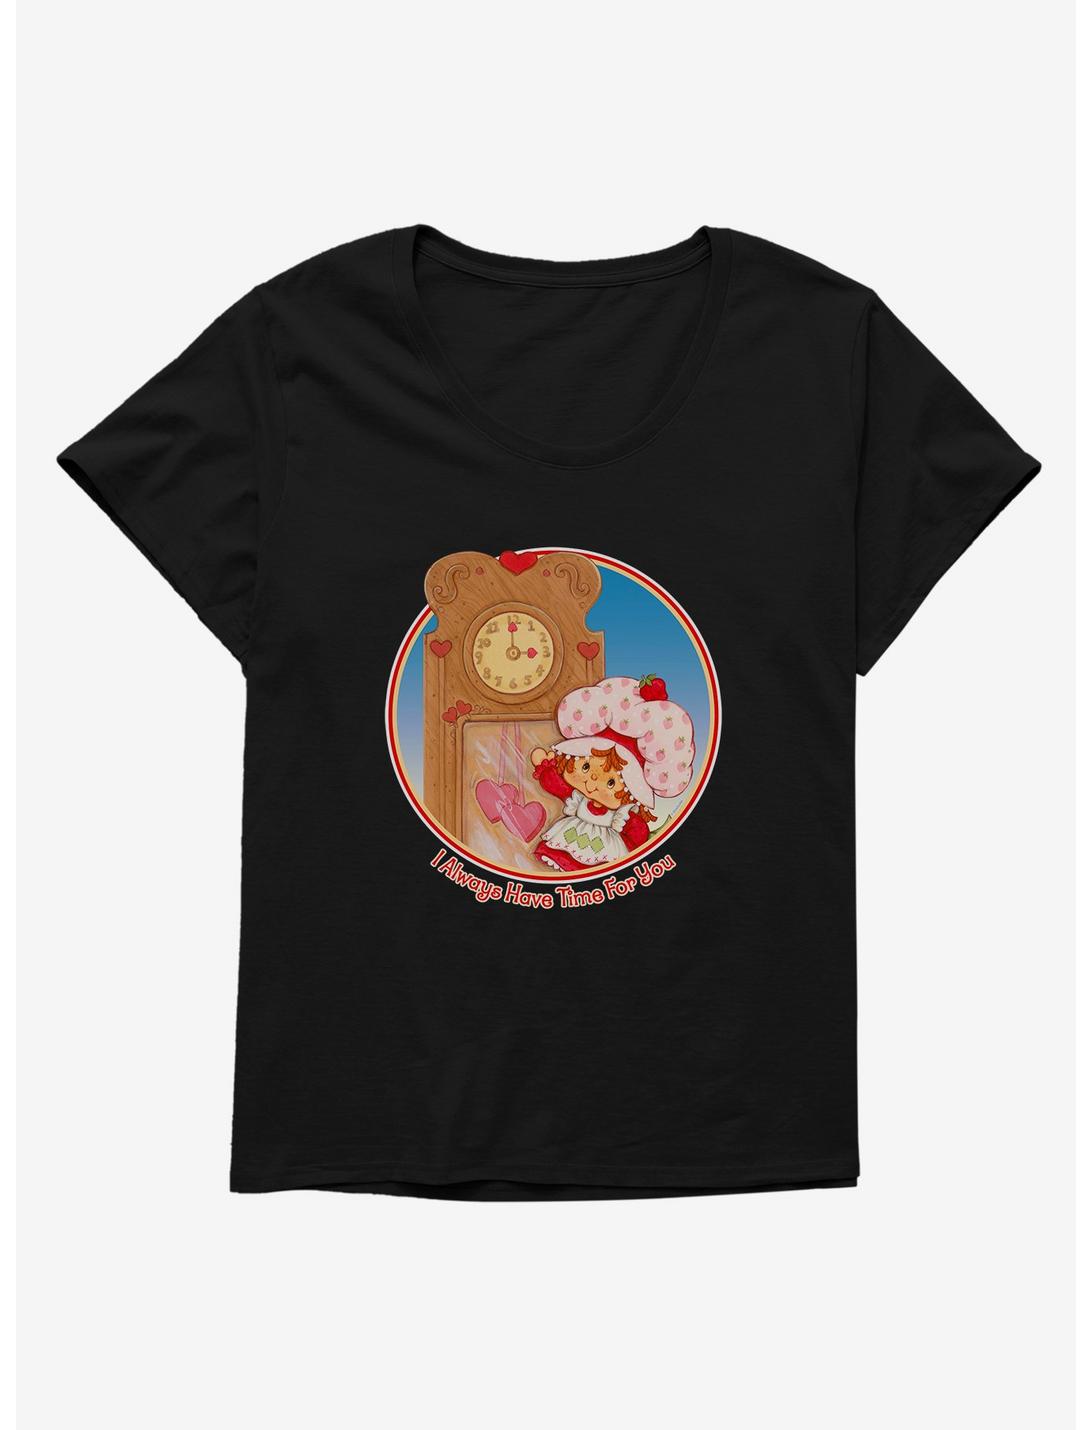 Strawberry Shortcake I Always Have Time For You Girls T-Shirt Plus Size, , hi-res